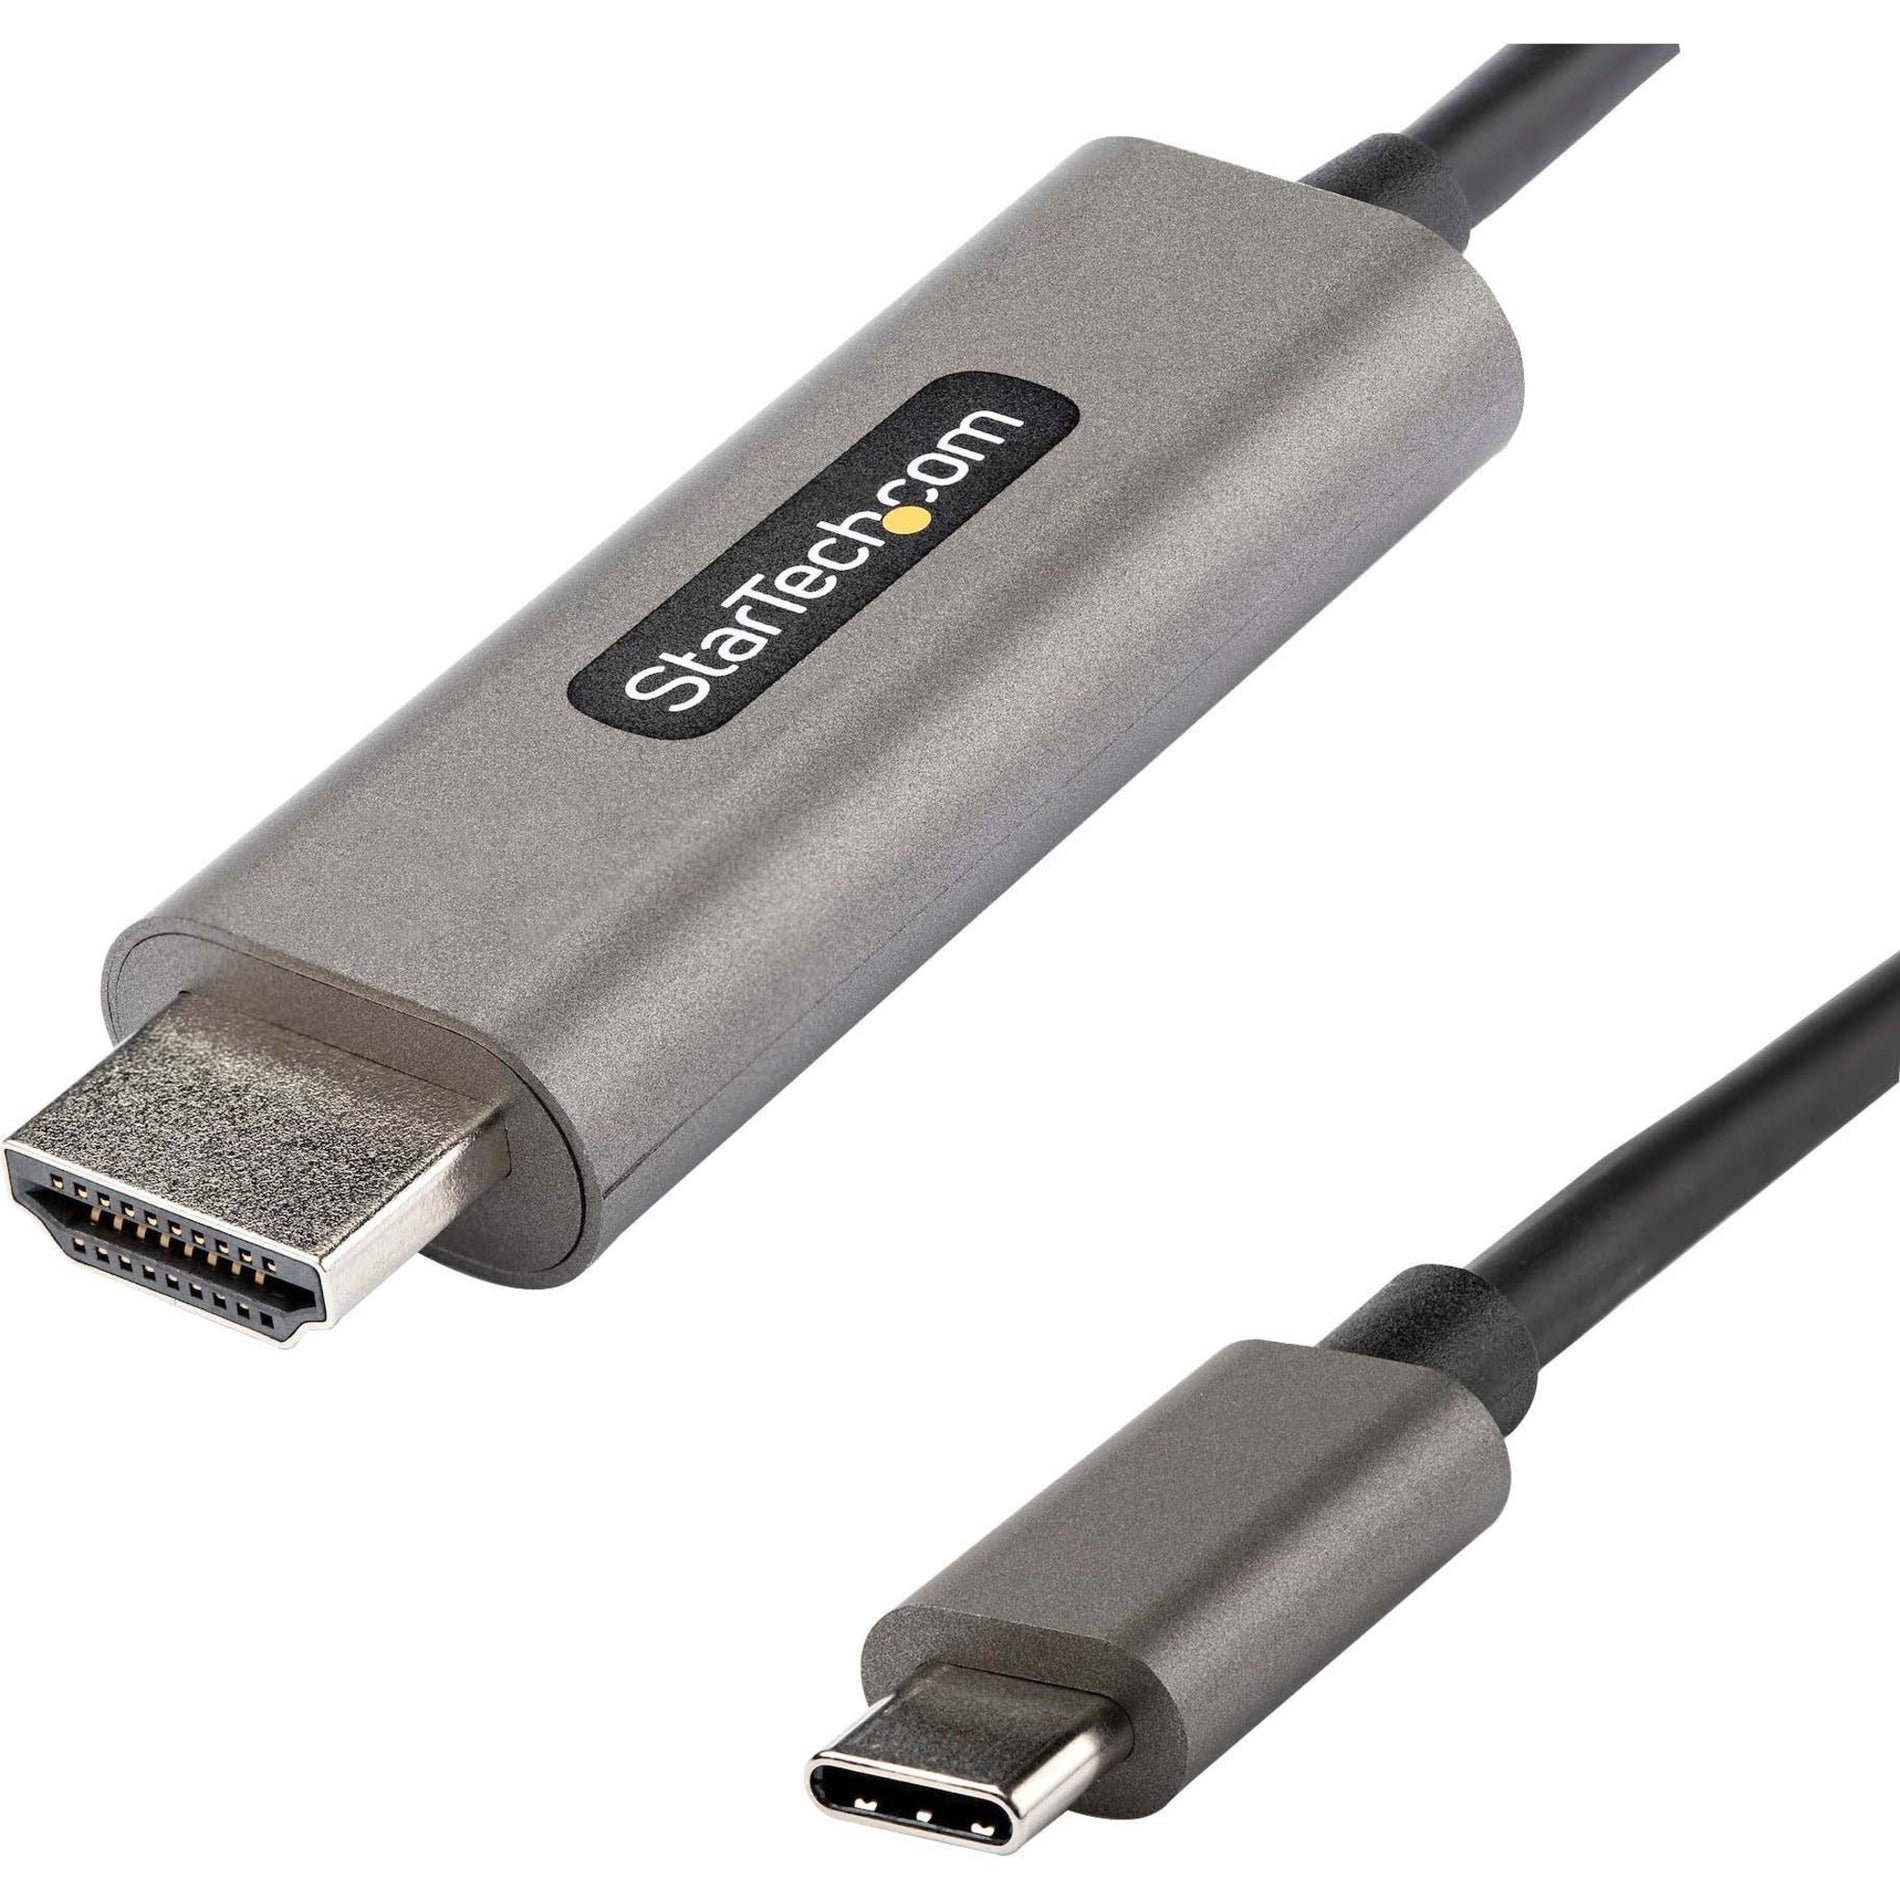 StarTech.com CDP2HDMM4MH 13ft USB C to HDMI Cable Adapter 4K 60Hz HDR10, Ultra HD HDMI 2.0b